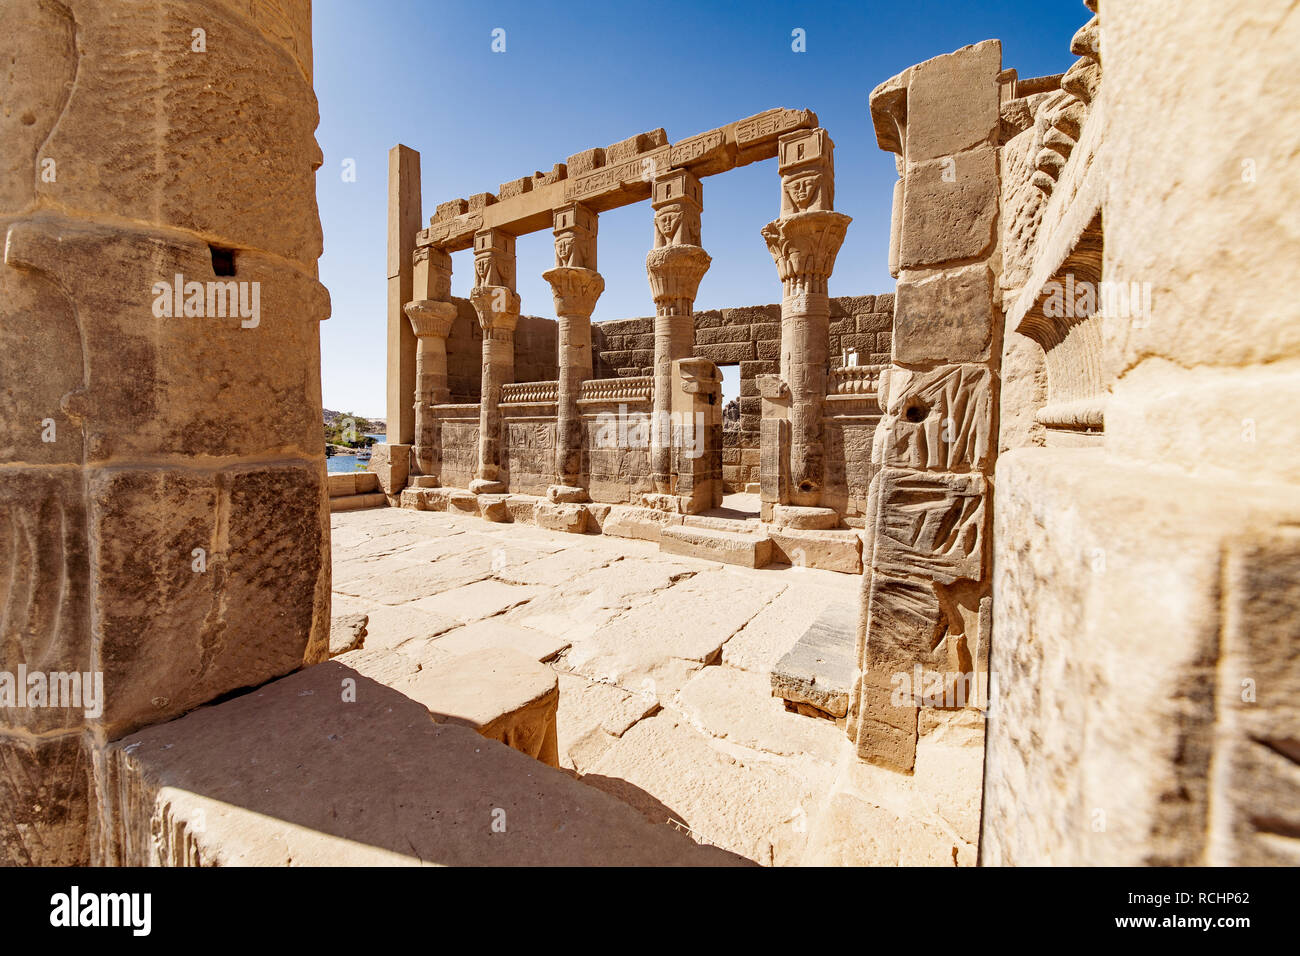 The temple of Philae in Aswan Egypt Stock Photo